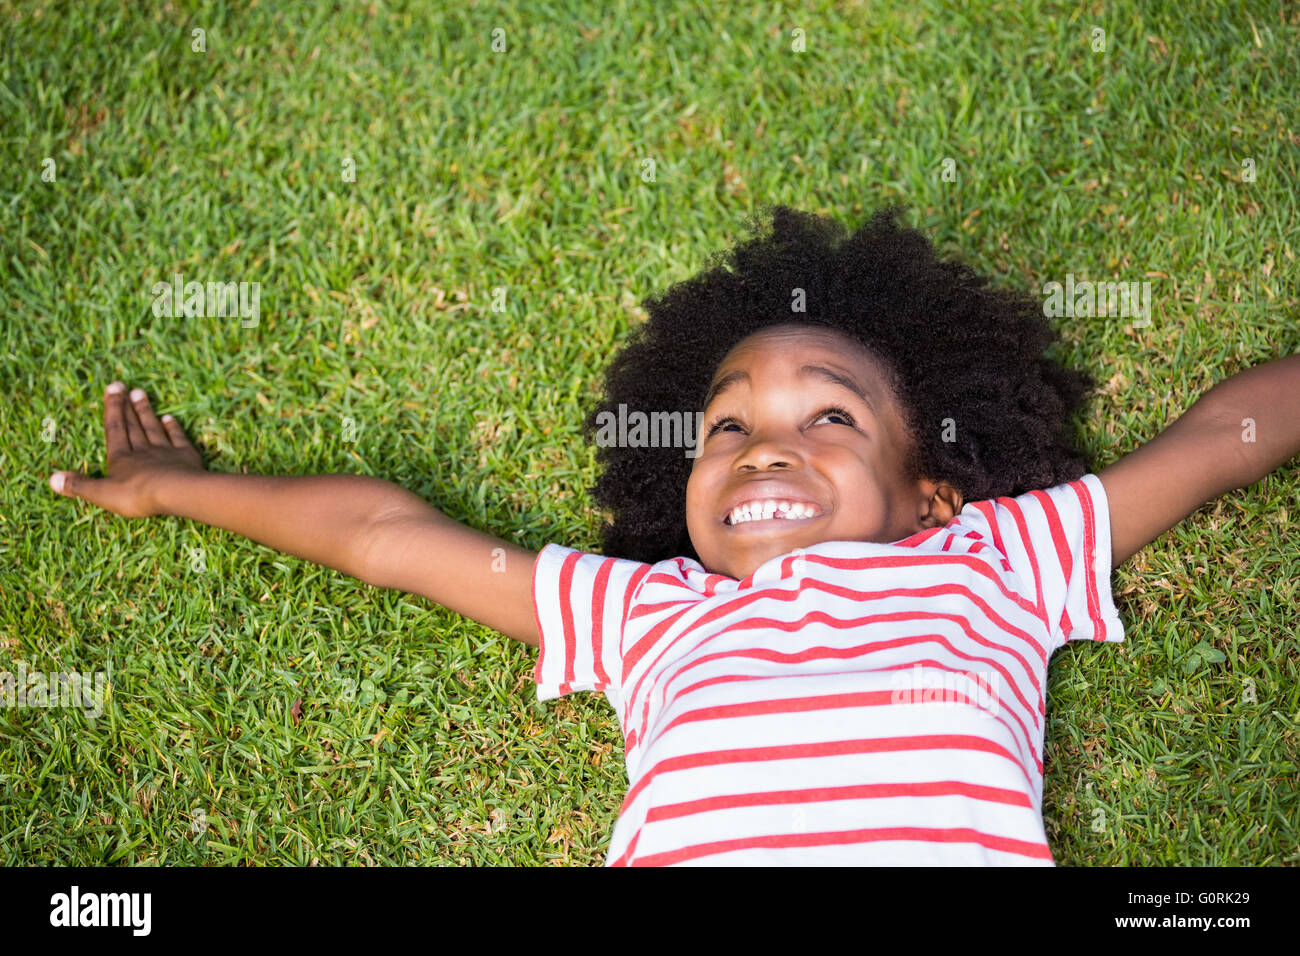 Smiling boy lying down in grass Stock Photo